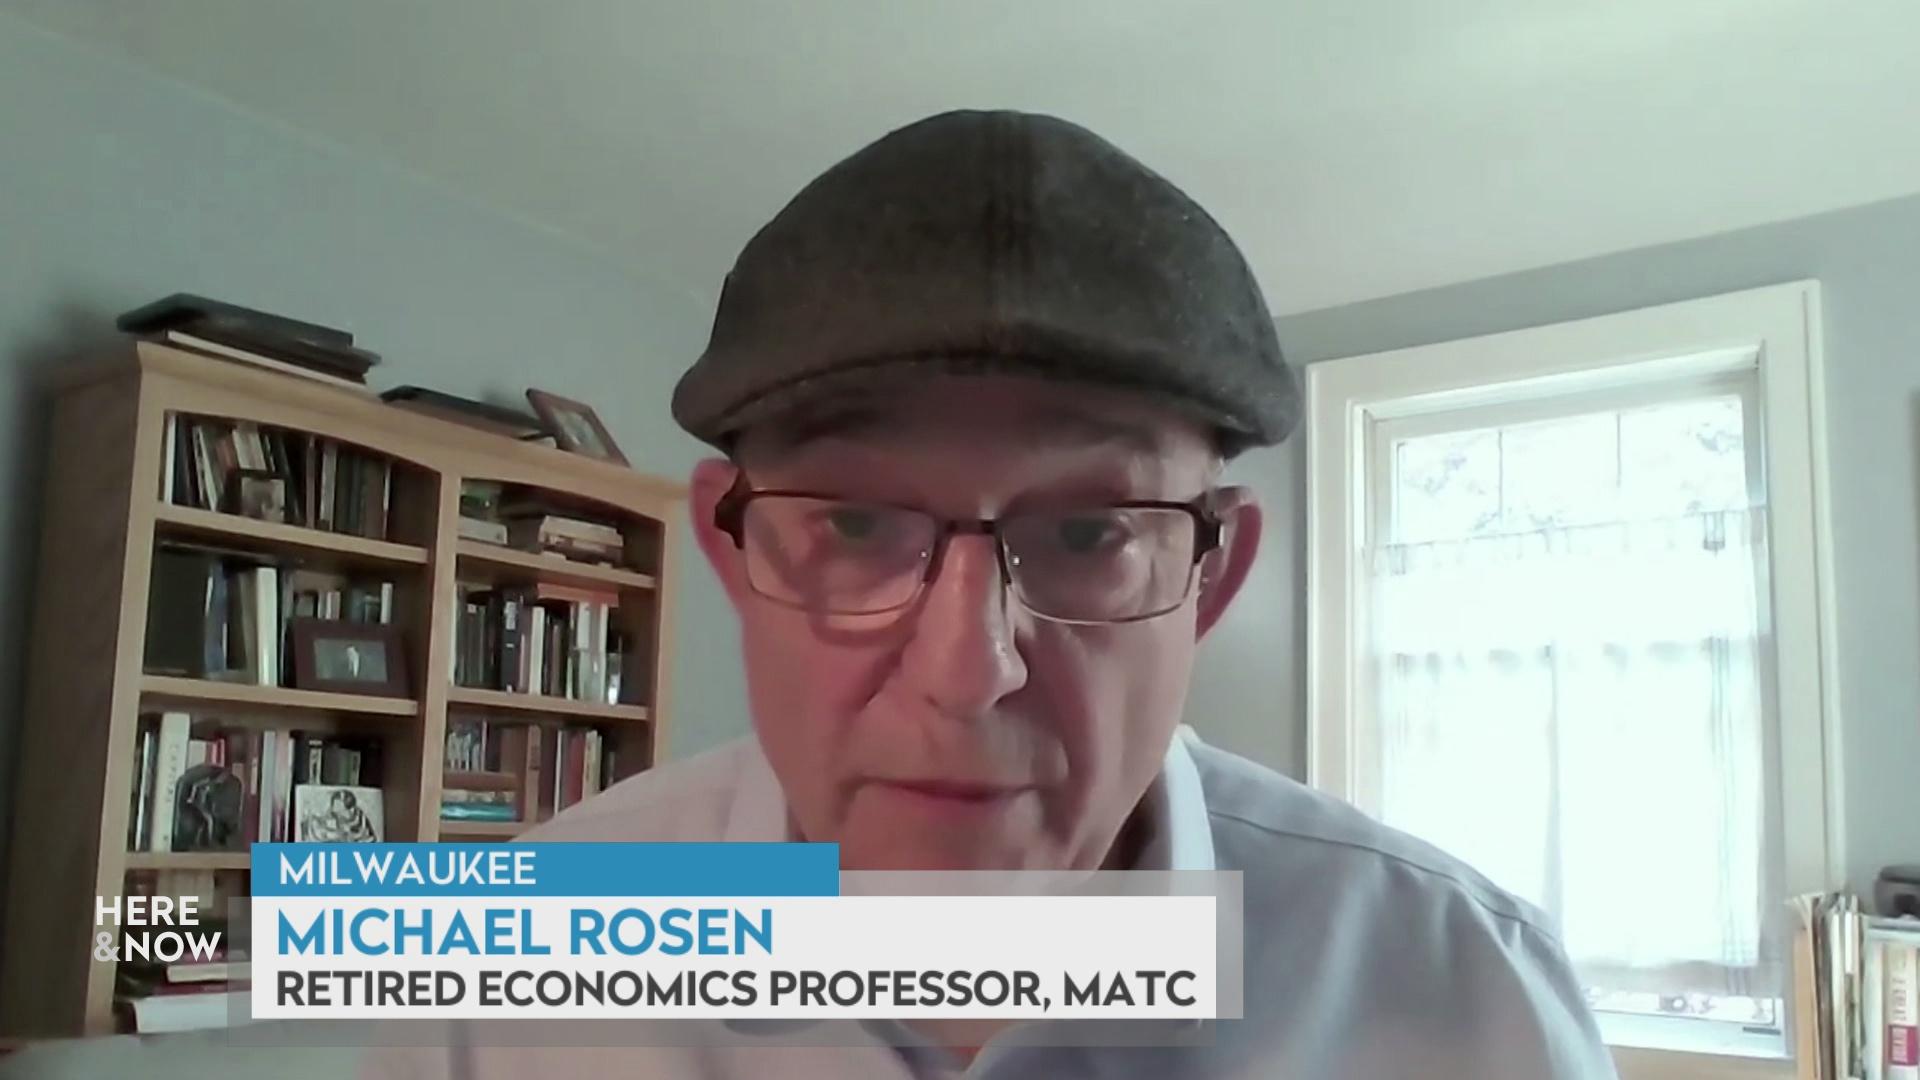 A still image from a video shows Michael Rosen seated in front of a wooden bookshelf lined with books and artwork with a graphic at bottom reading 'Milwaukee,' 'Michael Rosen' and 'Retired Economics Professor, MATC.'